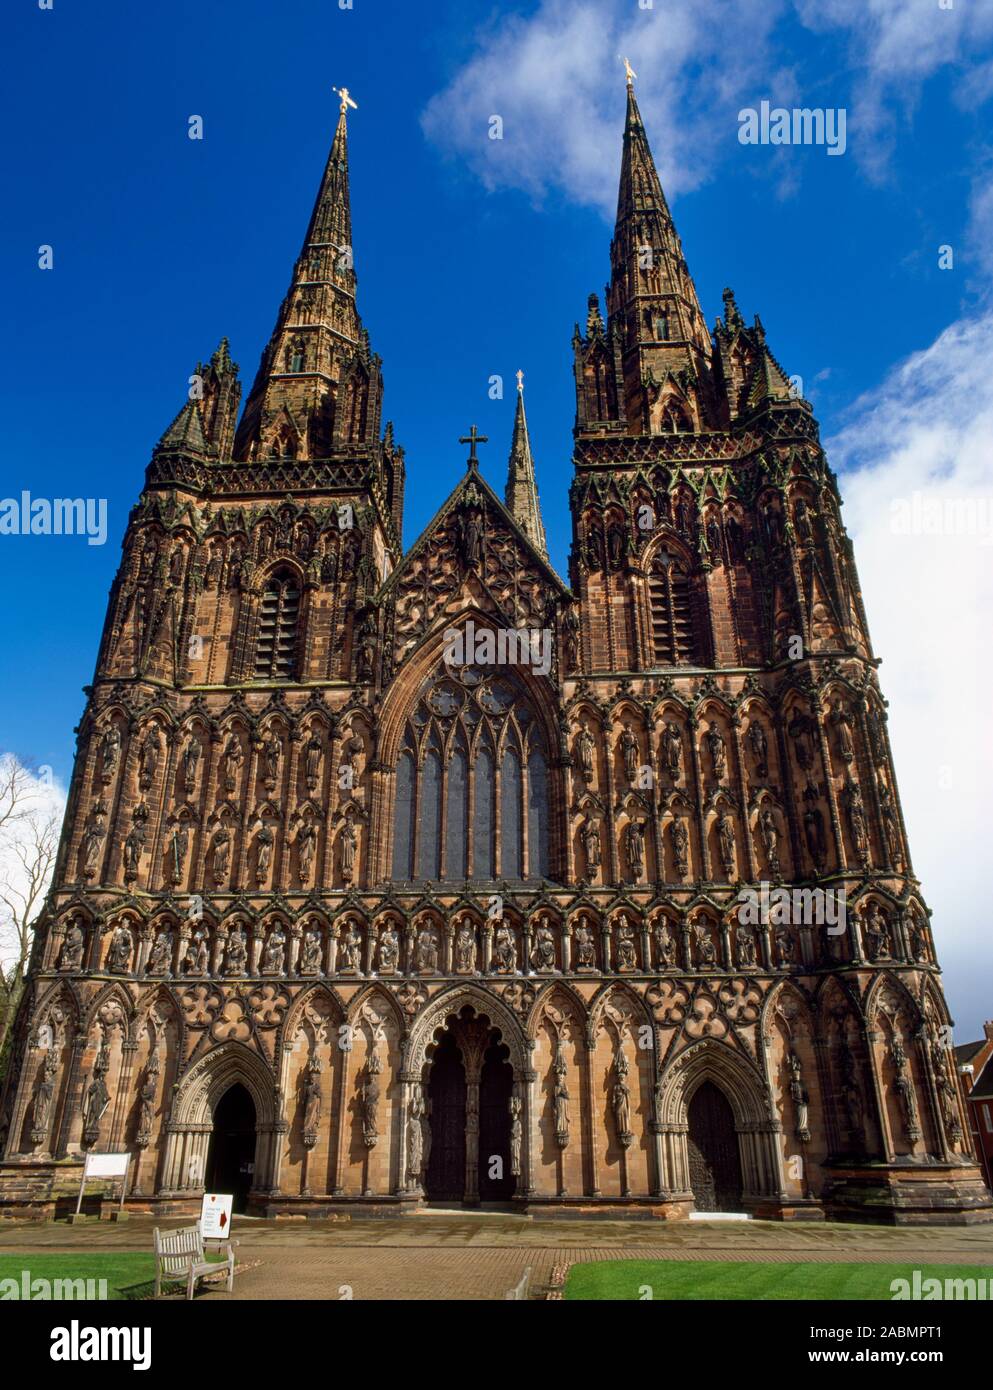 The west front of Lichfield Cathedral, Staffordshire, England, UK, displaying over 100 statues including English kings. The cathedral is mainly C13th. Stock Photo